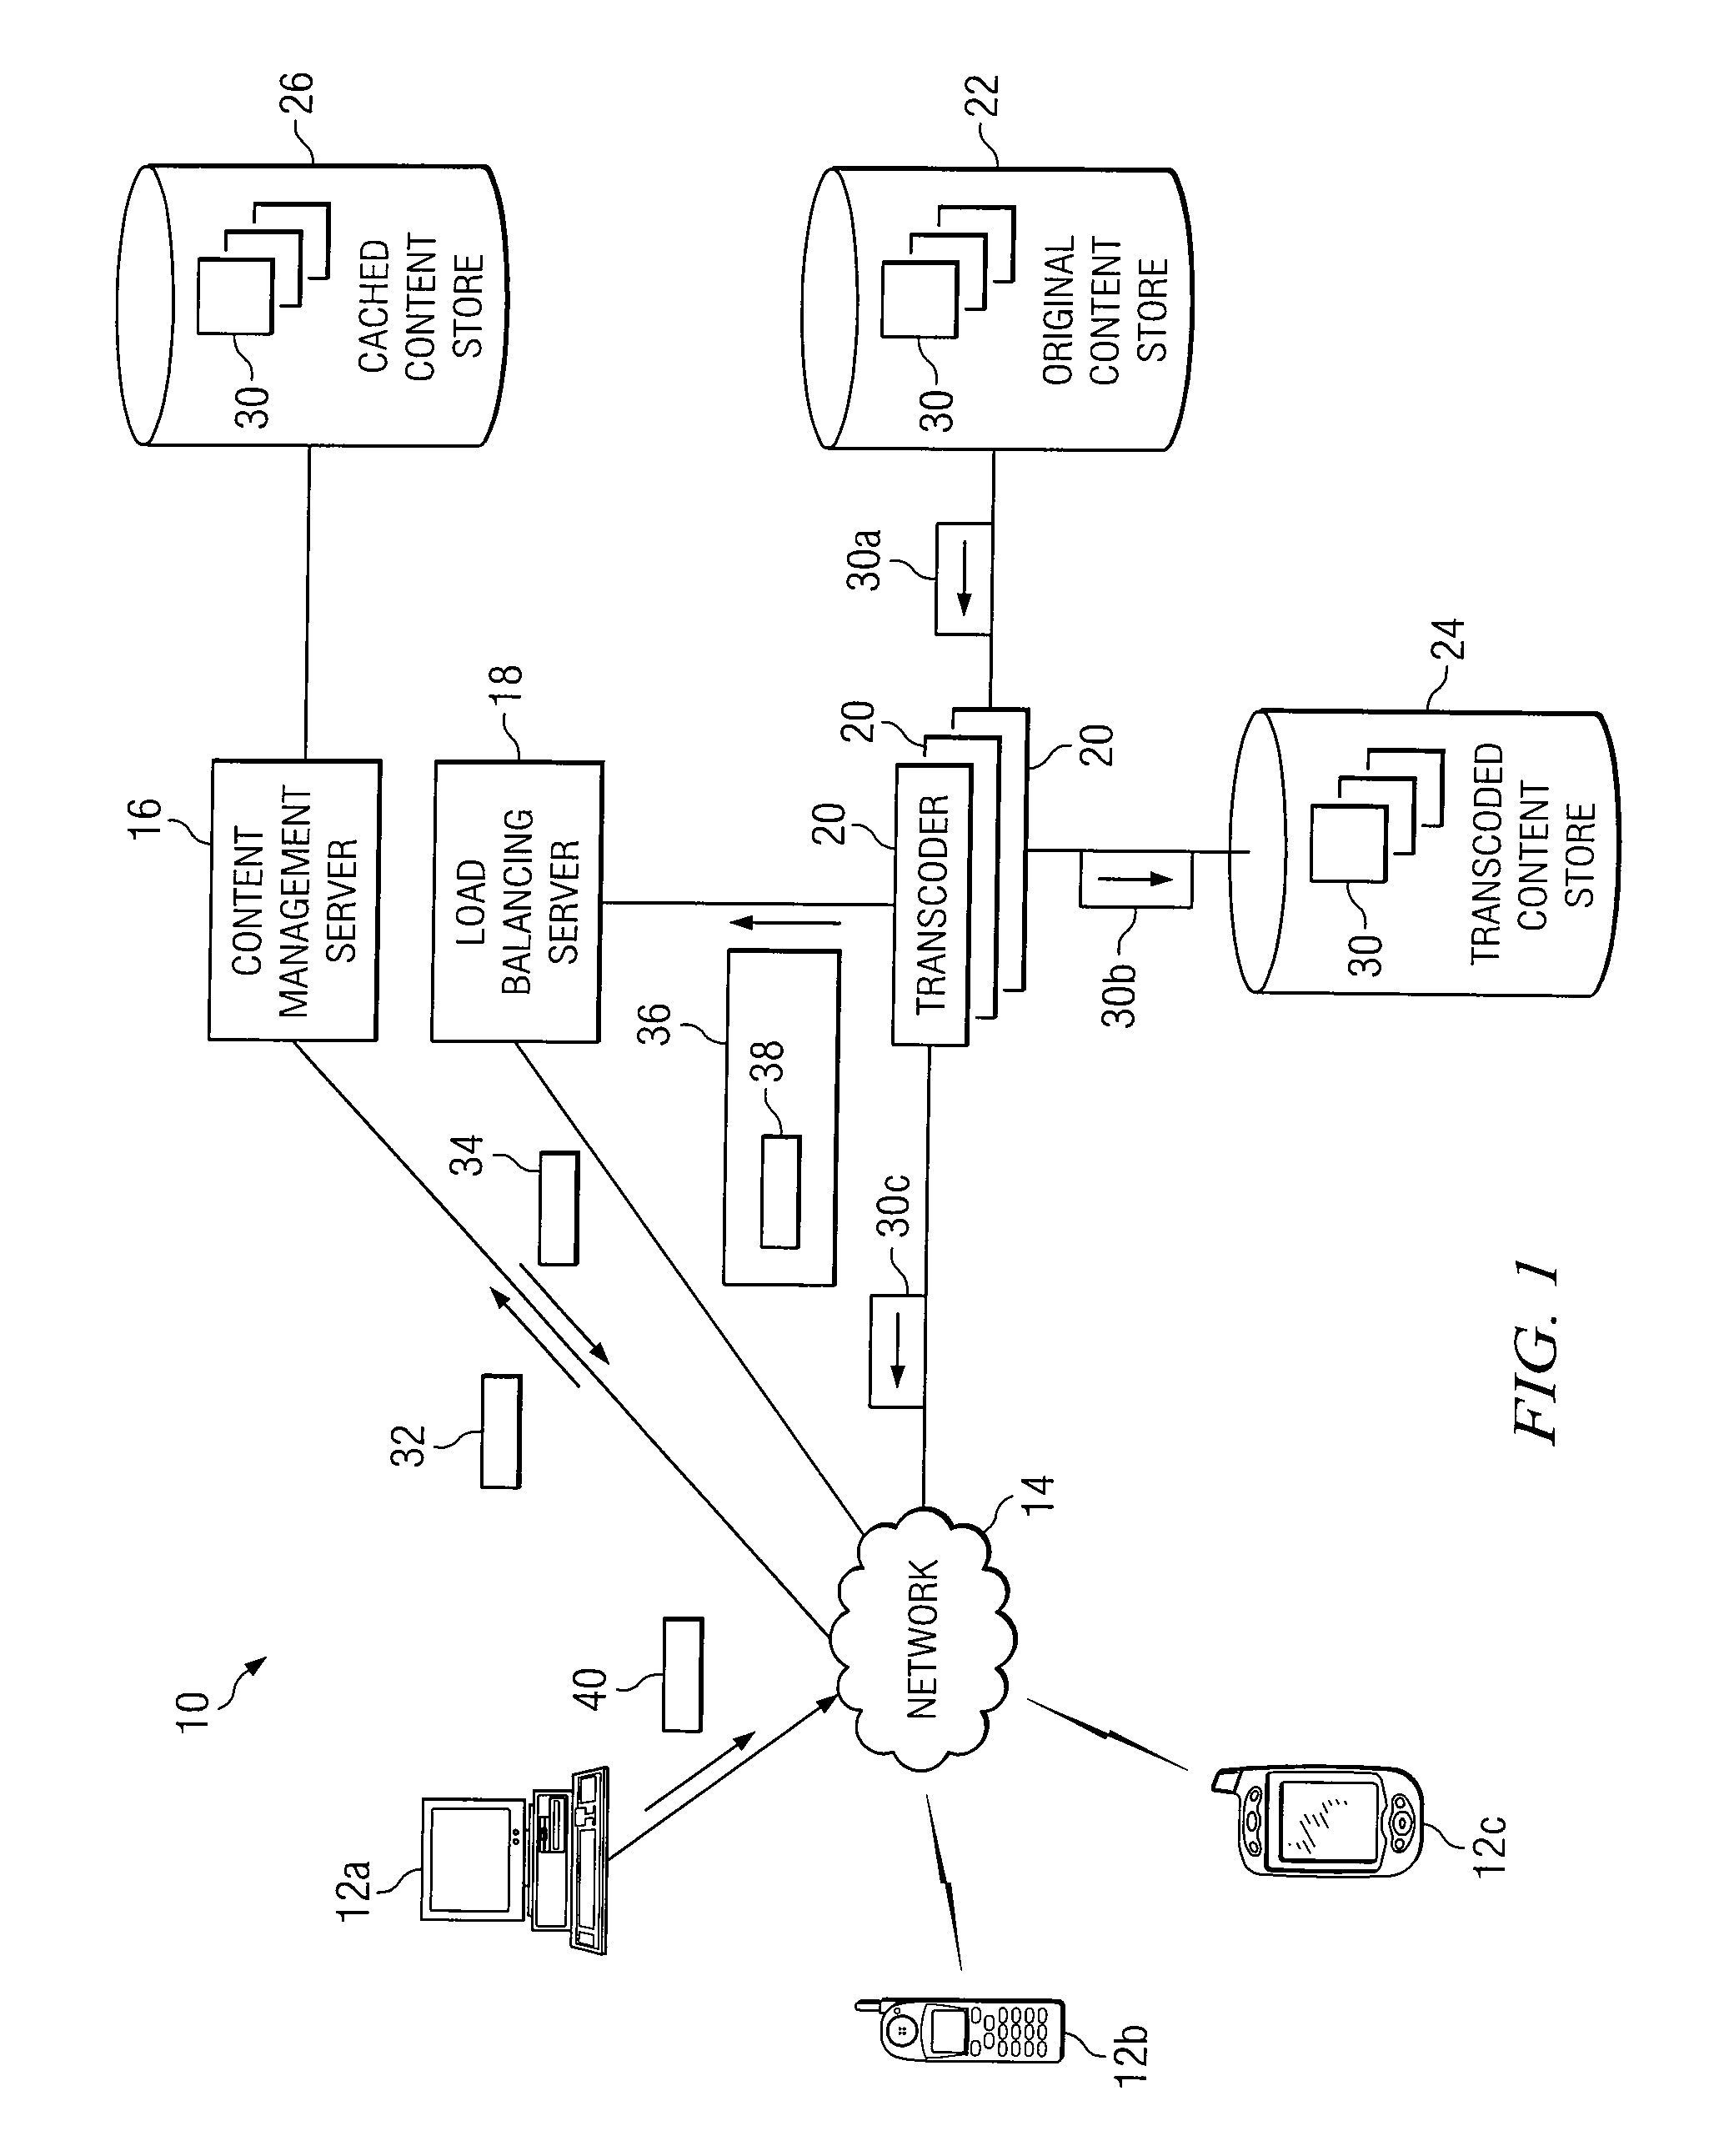 System and method for managing content